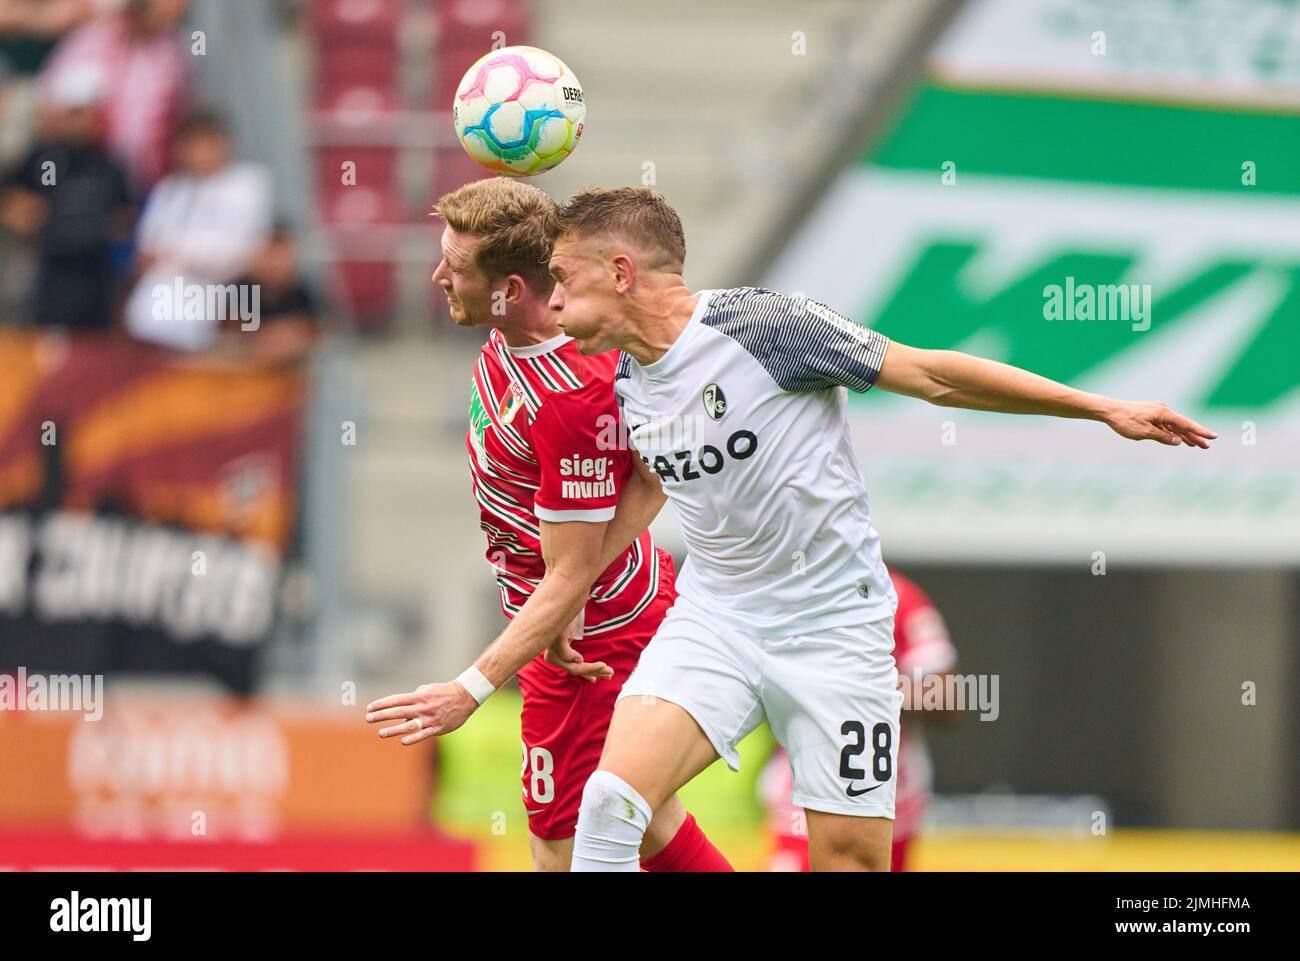 Andre HAHN, FCA 28  compete for the ball, tackling, duel, header, zweikampf, action, fight against Matthias Ginter, FRG 28  in the match FC AUGSBURG - SC FREIBURG 0-4 1.German Football League on Aug 06, 2022 in Augsburg, Germany. Season 2022/2023, matchday 1, 1.Bundesliga, FCB, Munich, 1.Spieltag © Peter Schatz / Alamy Live News    - DFL REGULATIONS PROHIBIT ANY USE OF PHOTOGRAPHS as IMAGE SEQUENCES and/or QUASI-VIDEO - Stock Photo